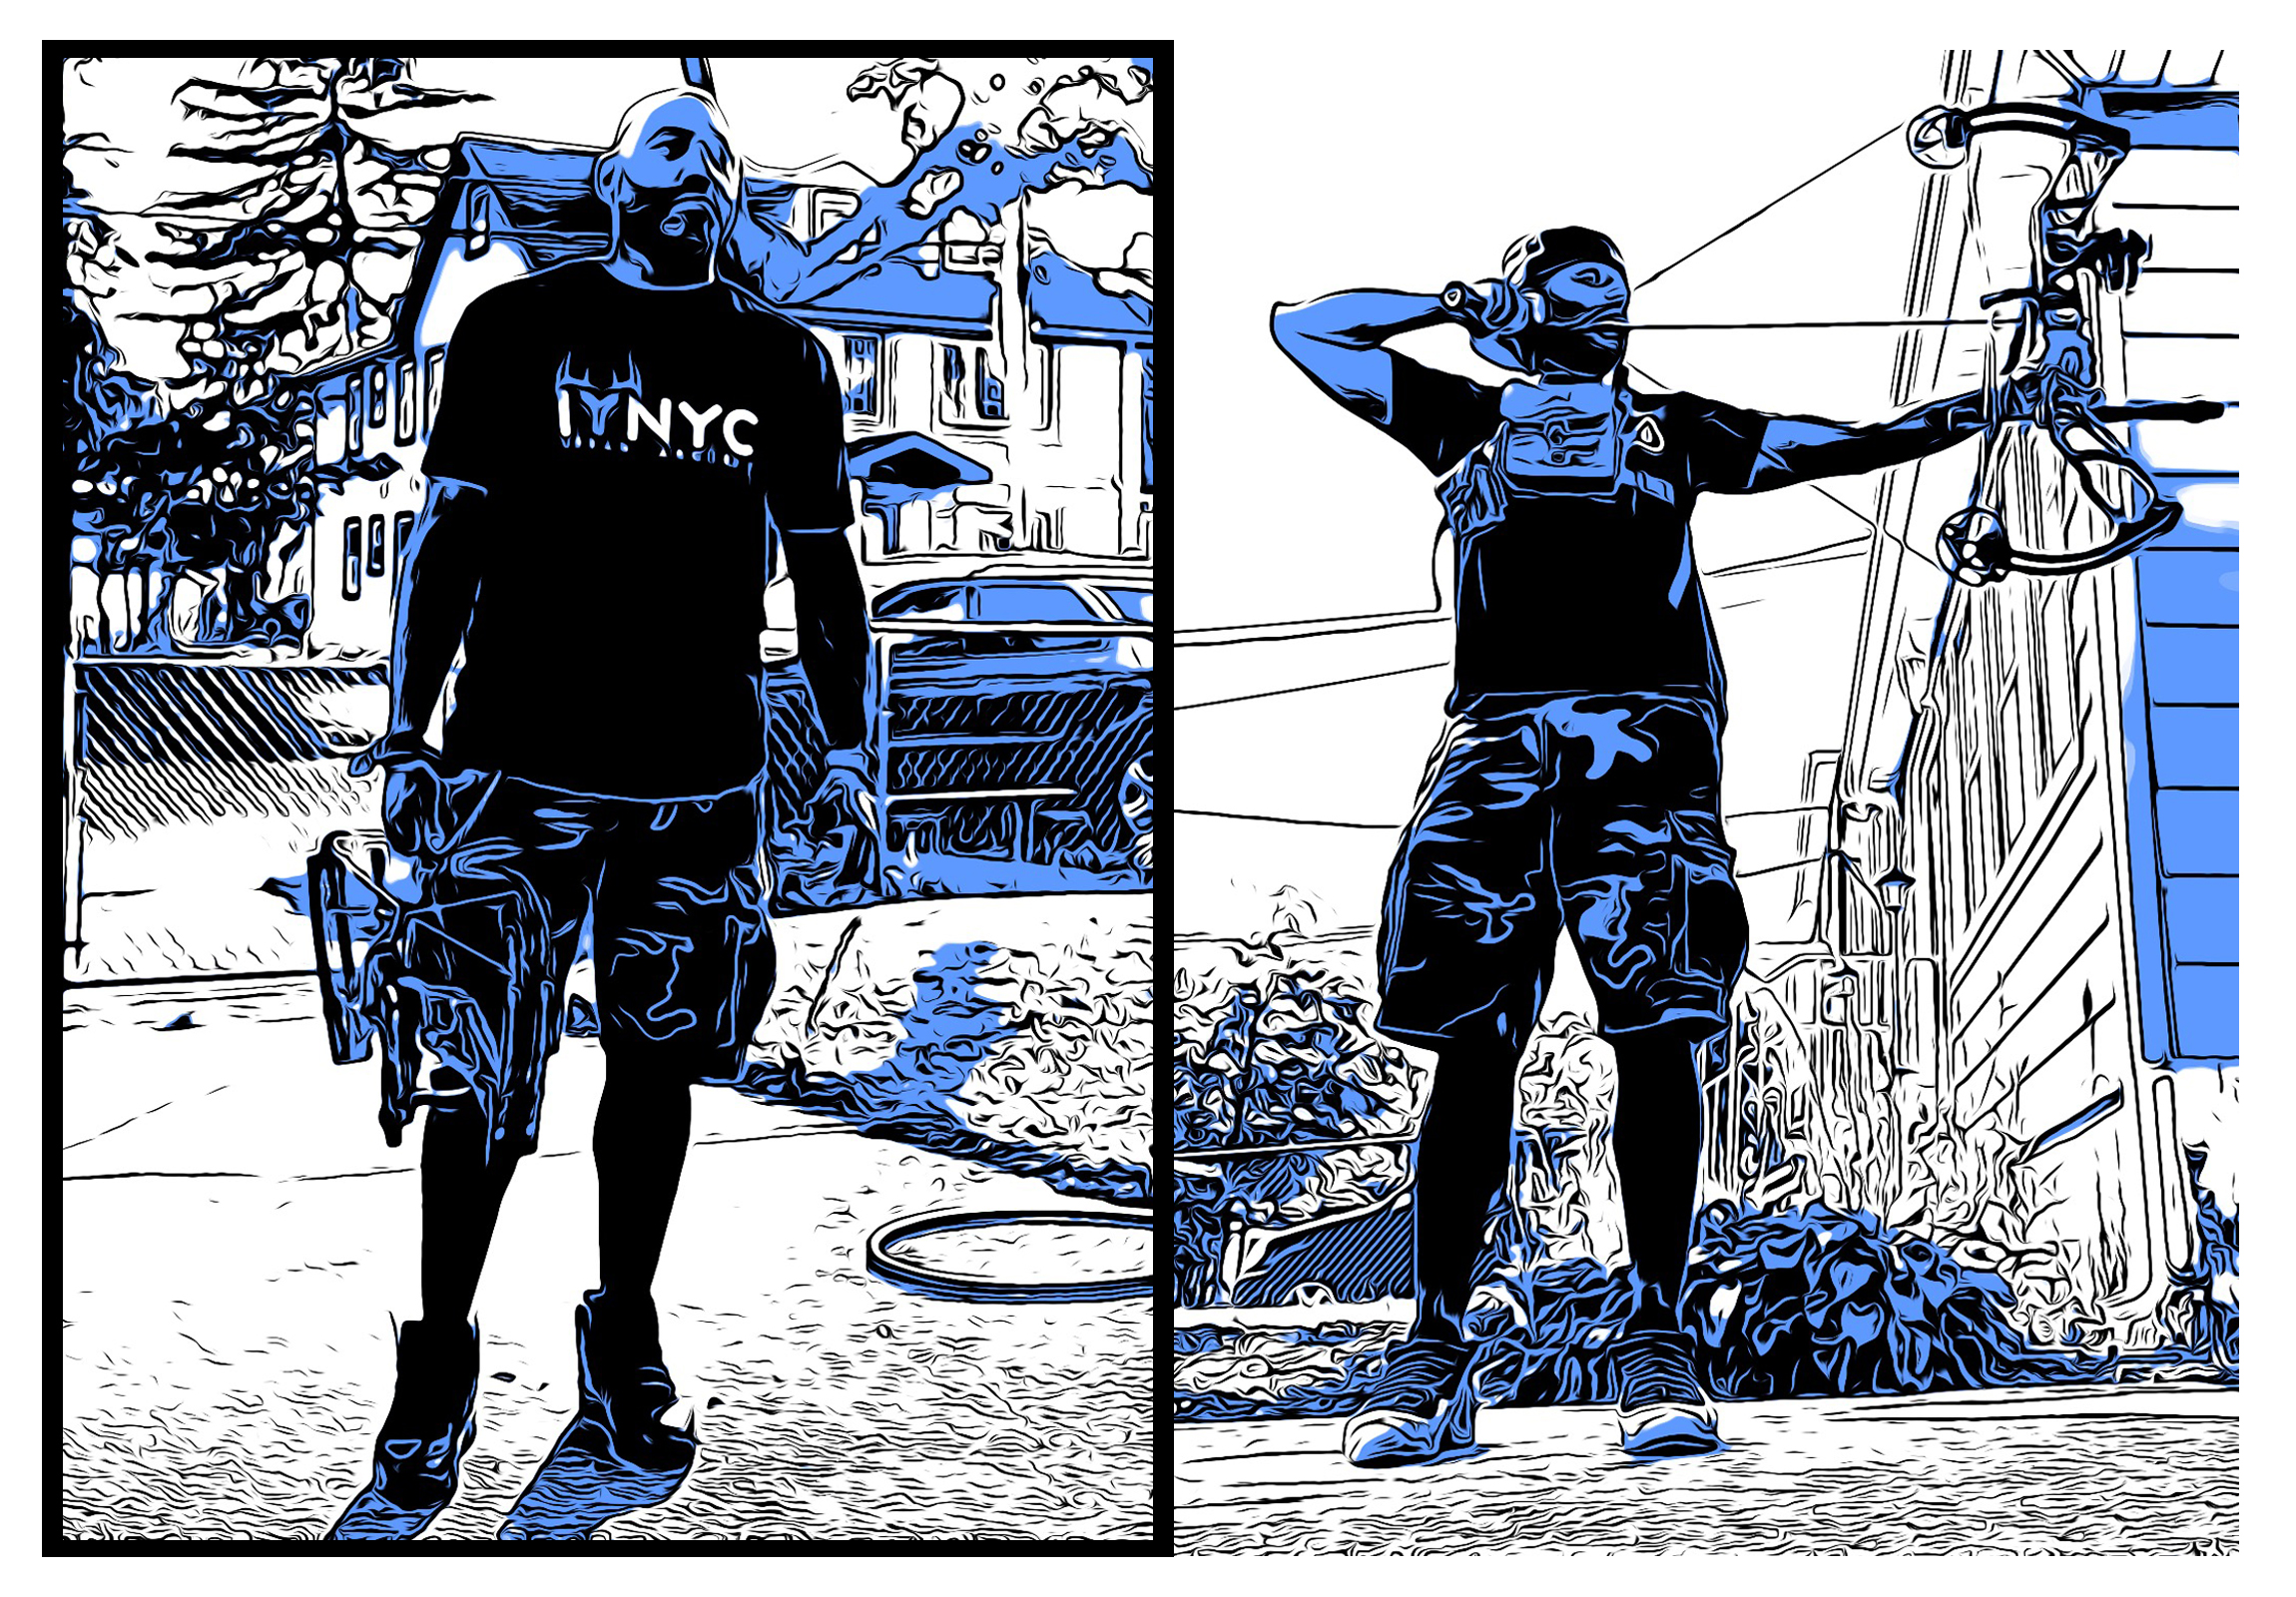 Blue, black, and white illustrations of a bowhunter in NYC.